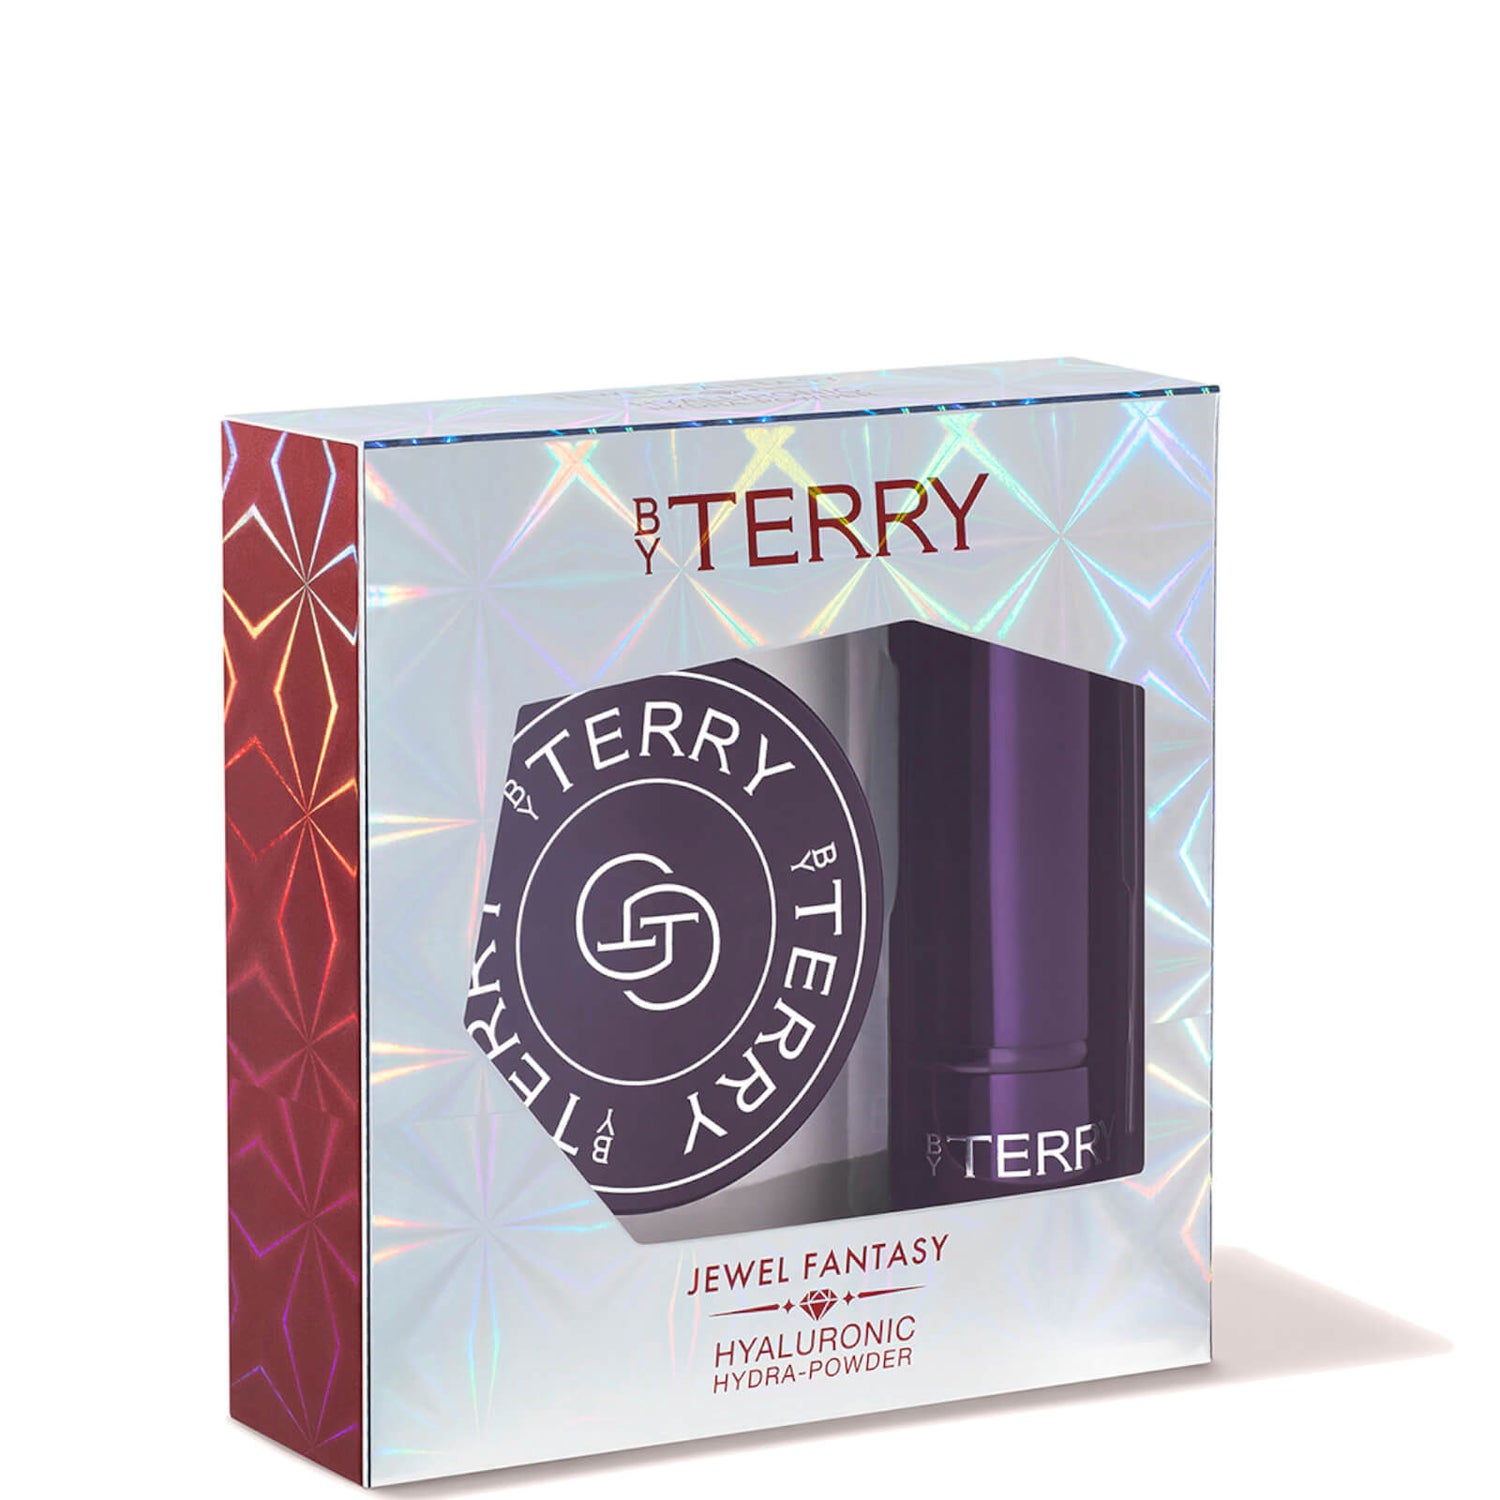 By Terry Jewel Fantasy Hyaluronic Duo Set (Worth £77.00)